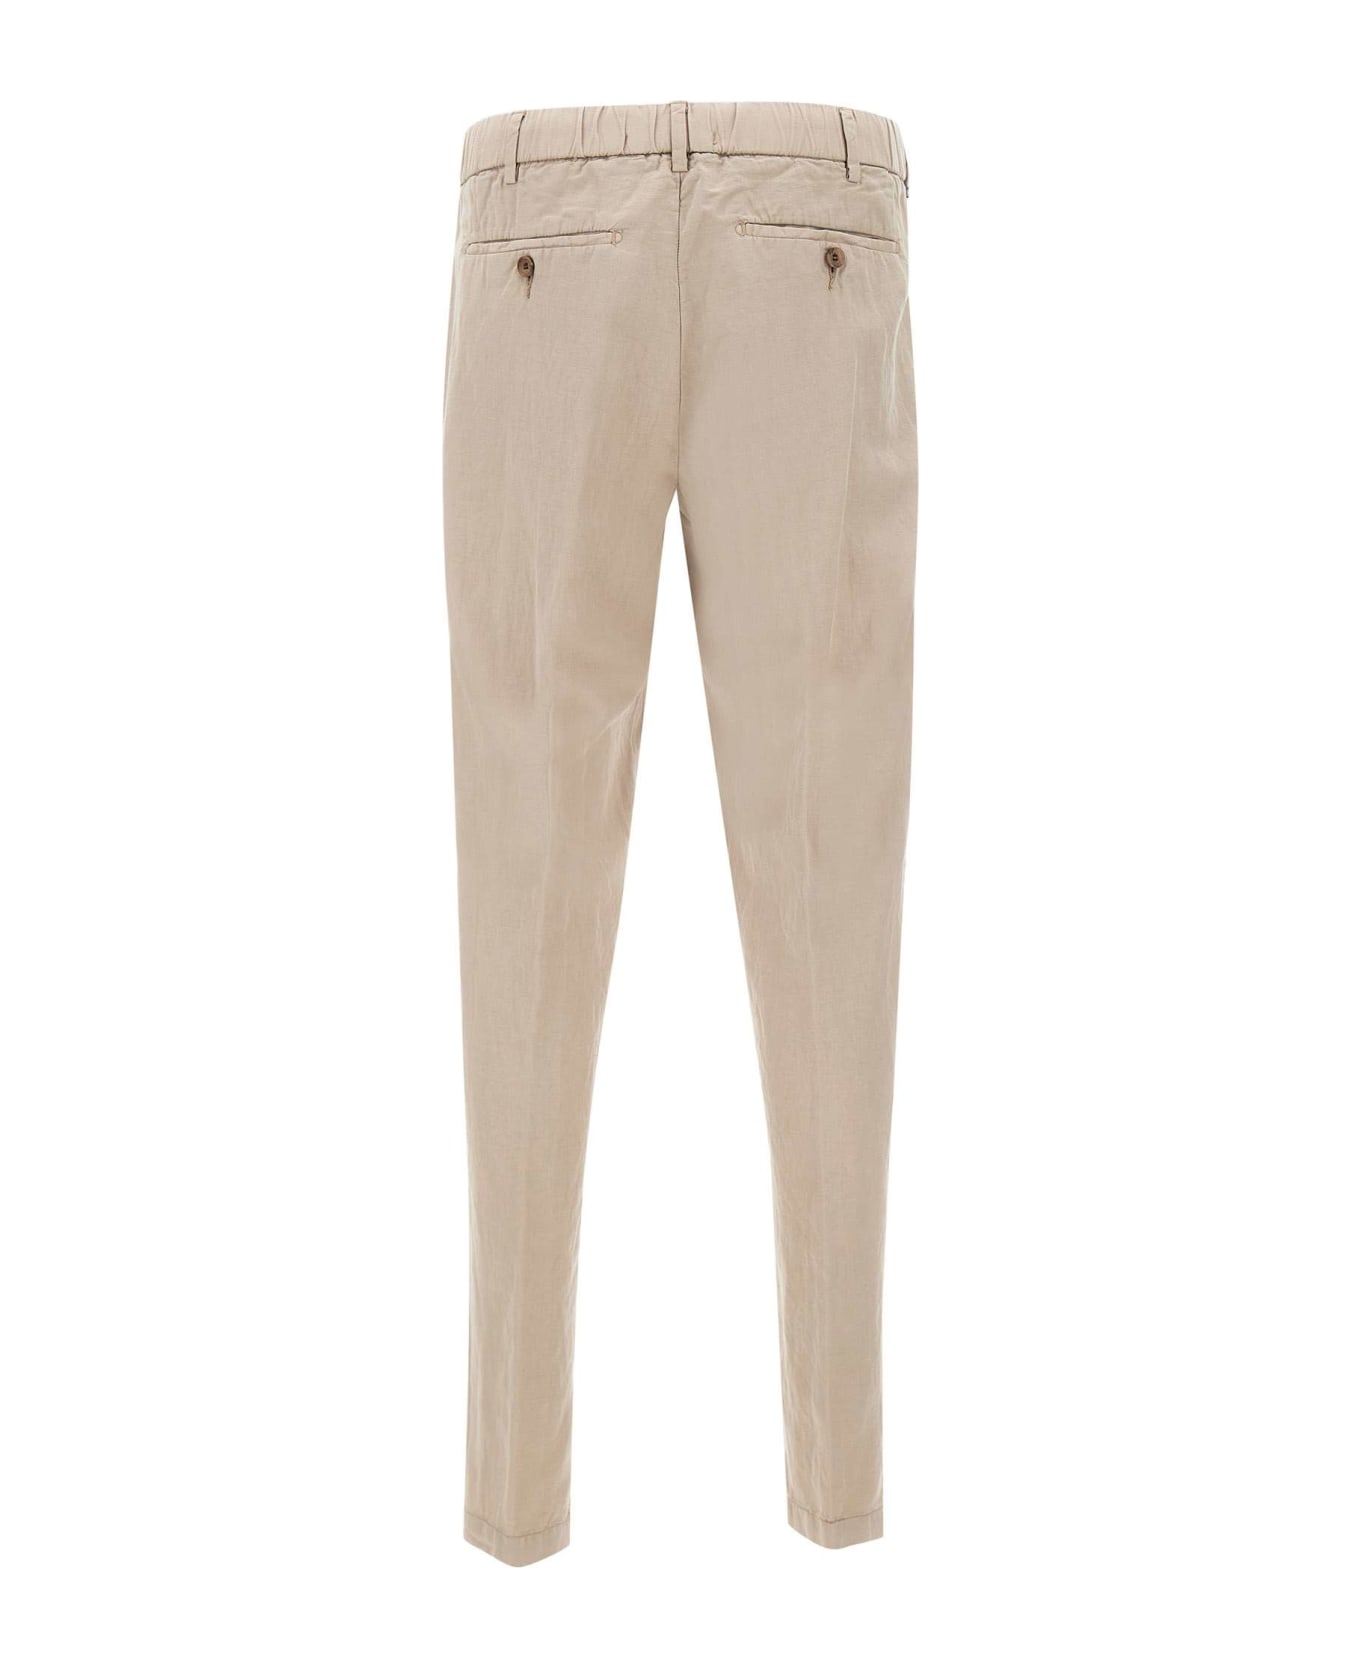 Myths "apollo" Linen And Cotton Trousers - BEIGE